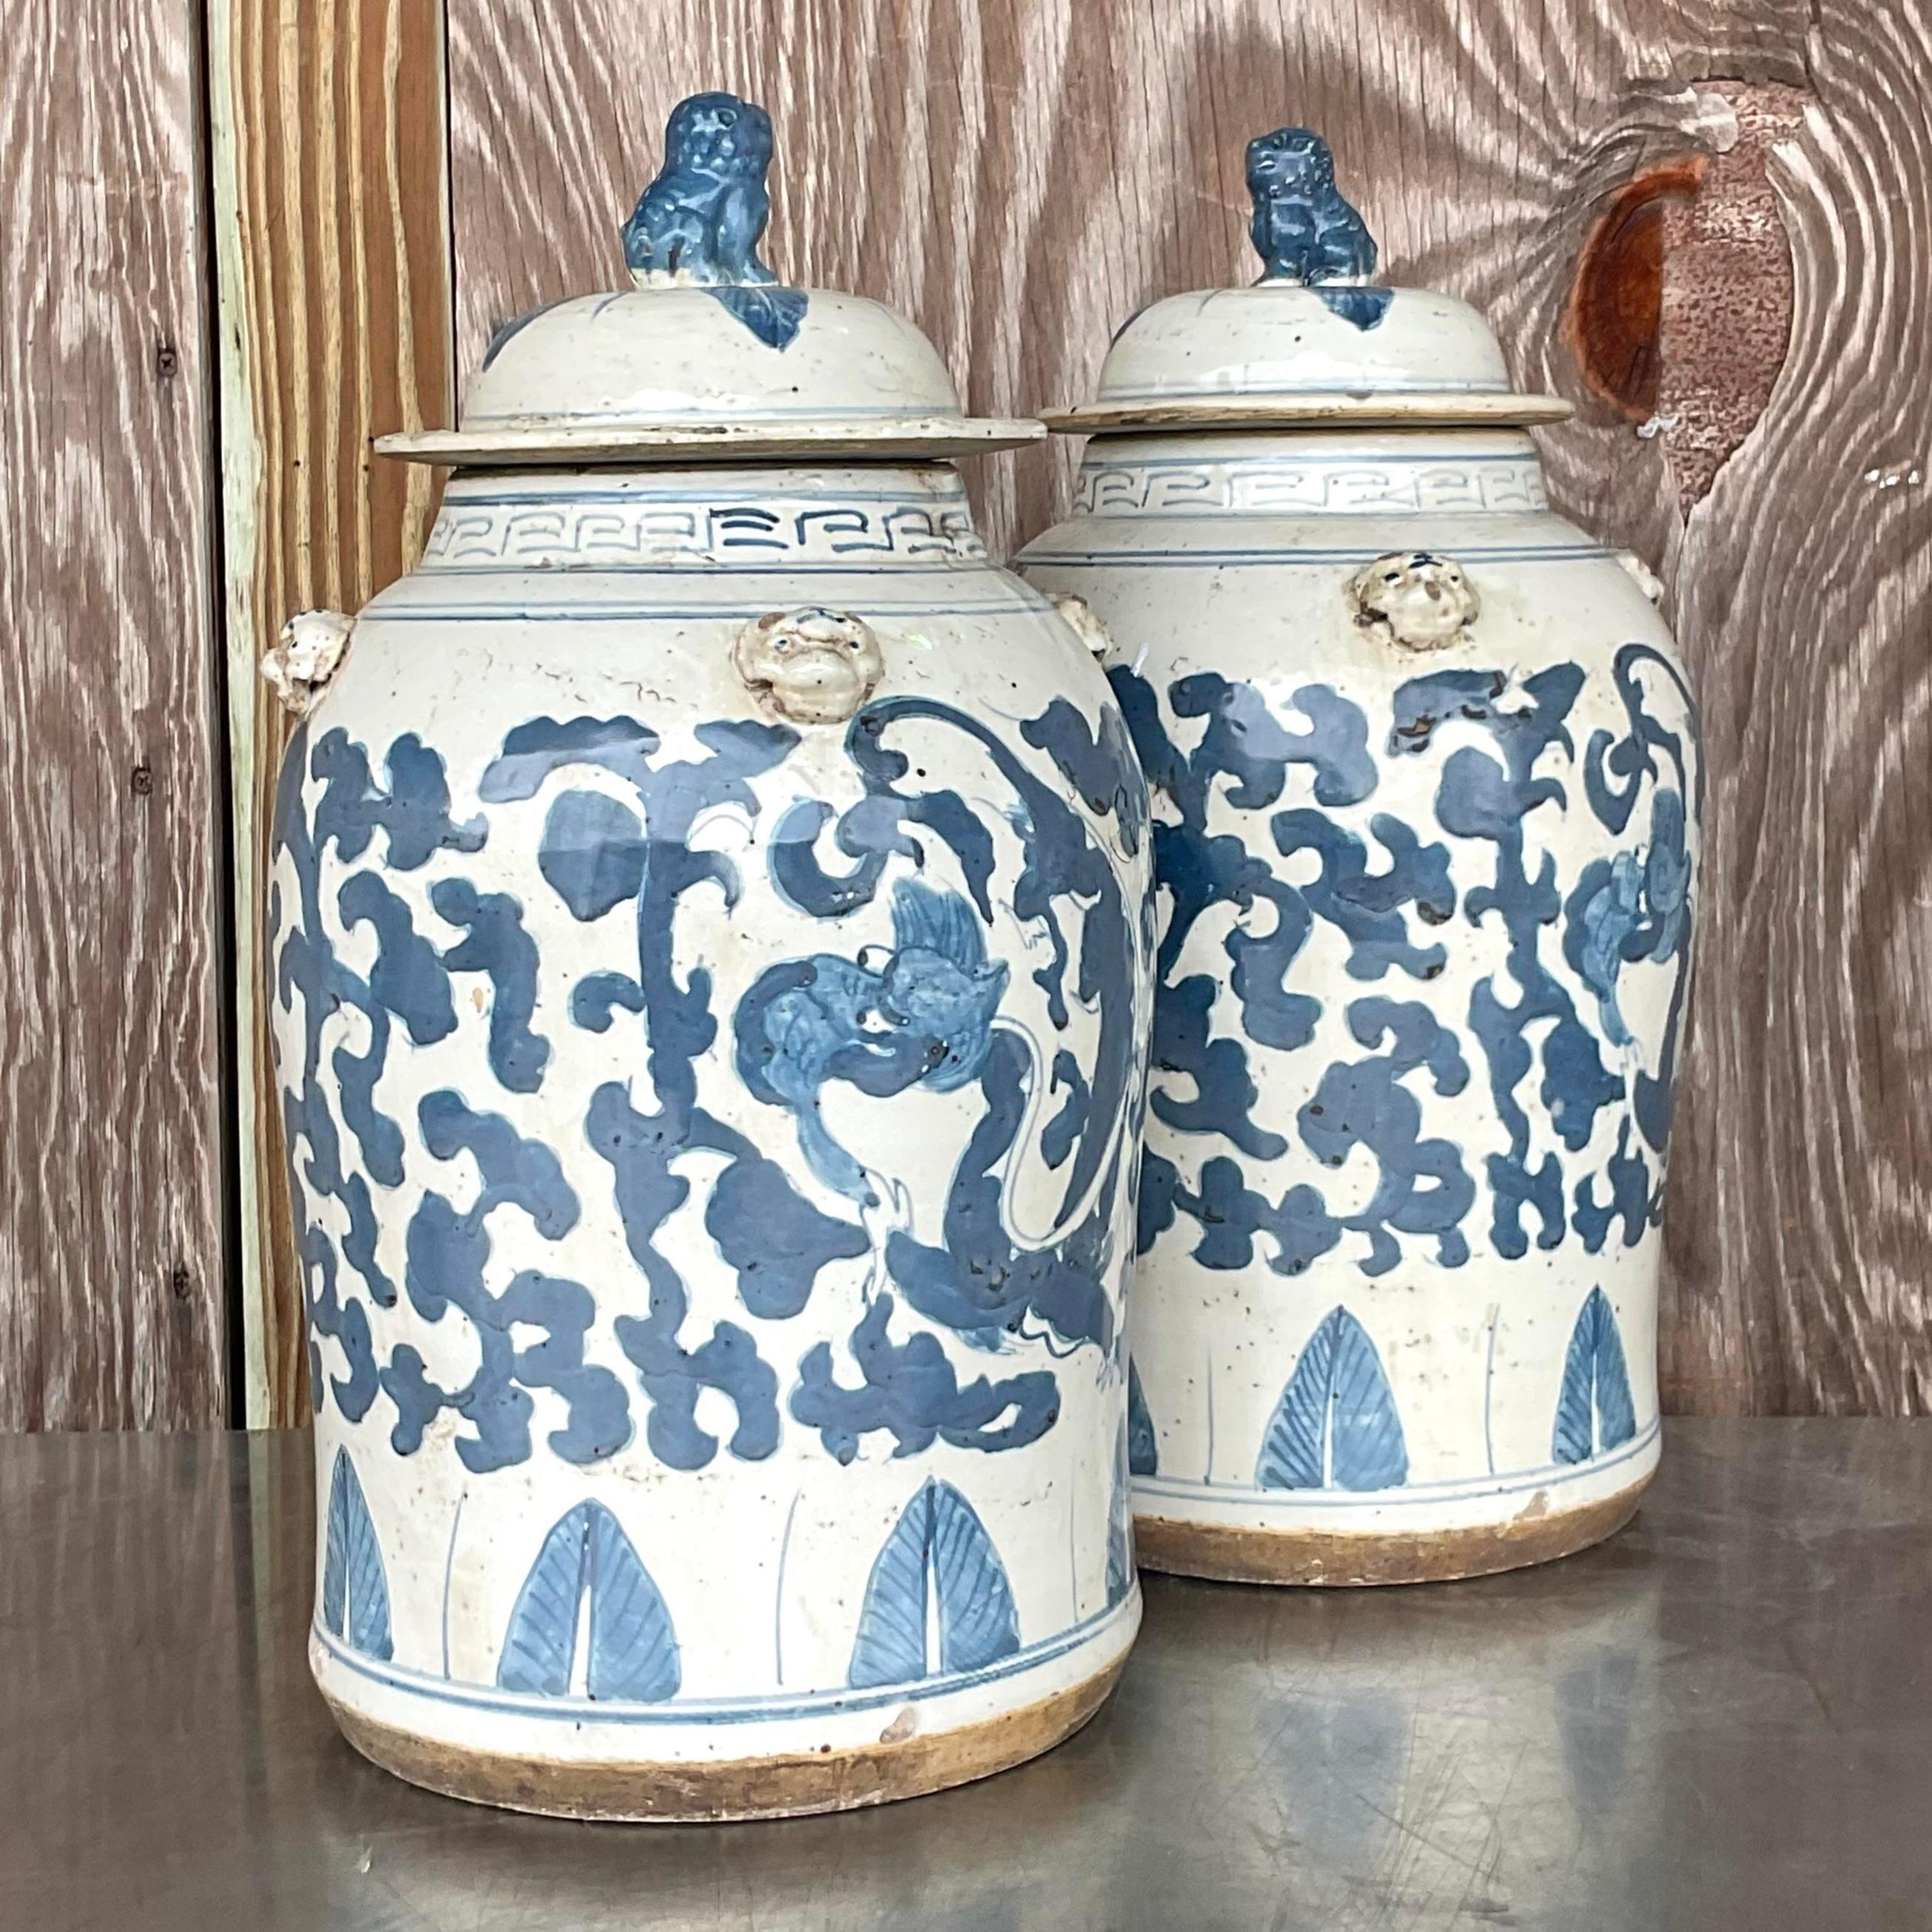 A stunning pair of vintage Asian urns. An iconic blue and white hand painted design. A handsome pair of foo dogs on top of each urn. Acquired from a Palm Beach estate